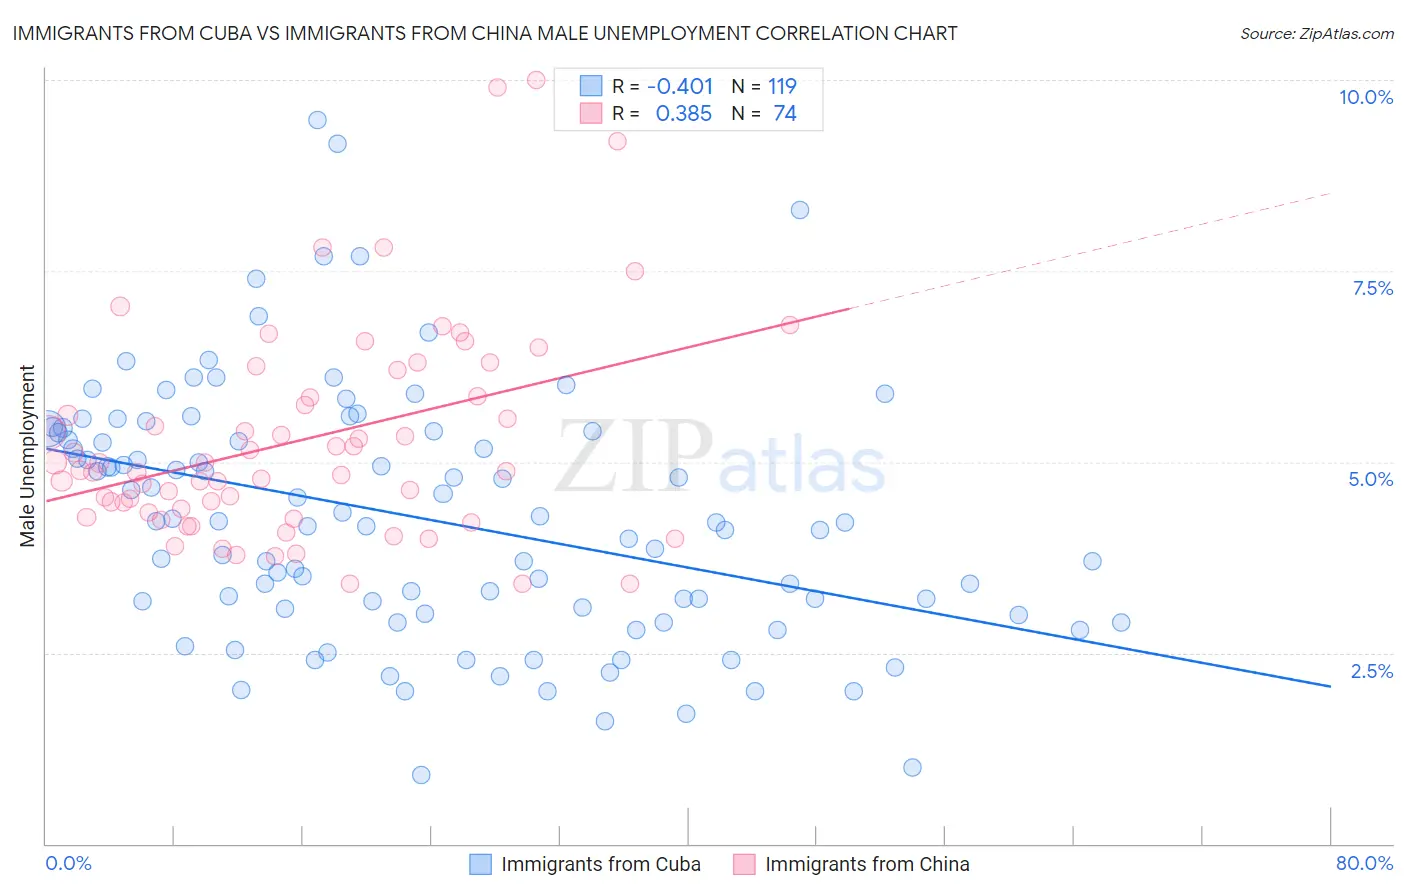 Immigrants from Cuba vs Immigrants from China Male Unemployment